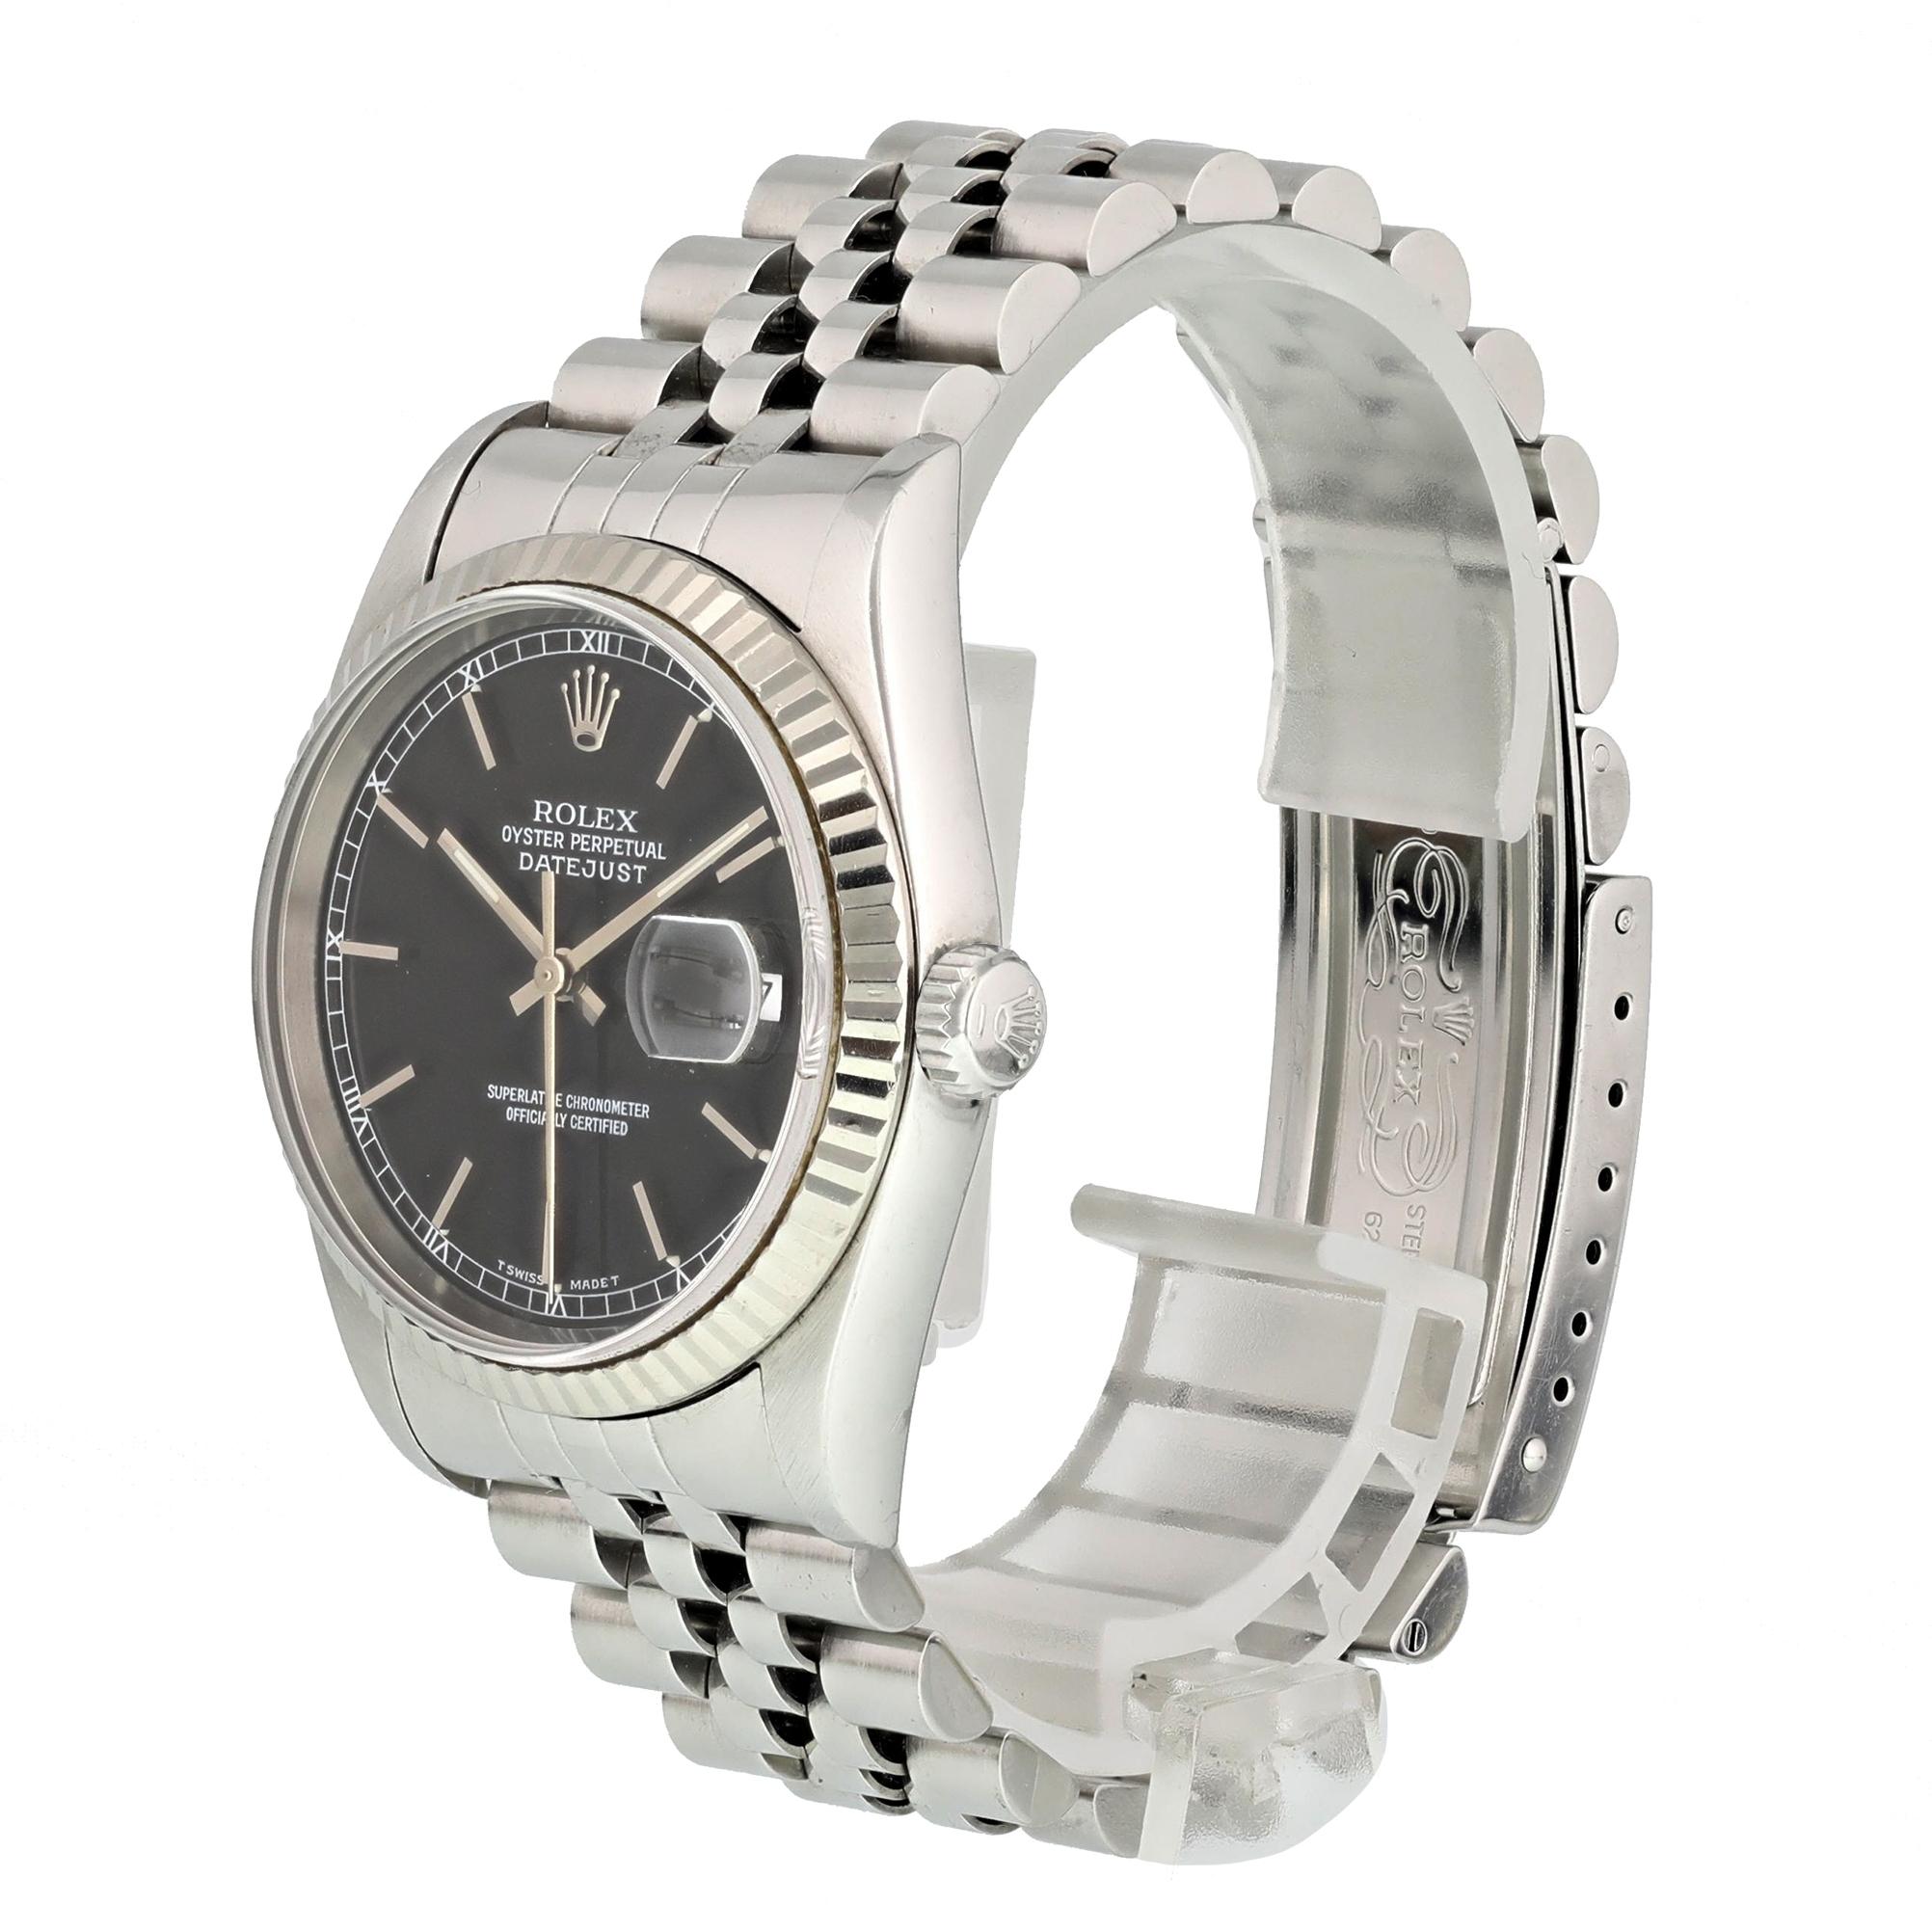 Rolex Datejust 16234 Men Watch. 
36mm Stainless Steel case. 
White Gold Stationary bezel. 
Black dial with Luminous hands and index hour markers. 
Minute markers on the outer dial. 
Date display at the 3 o'clock position. 
Stainless Steel Jubilee